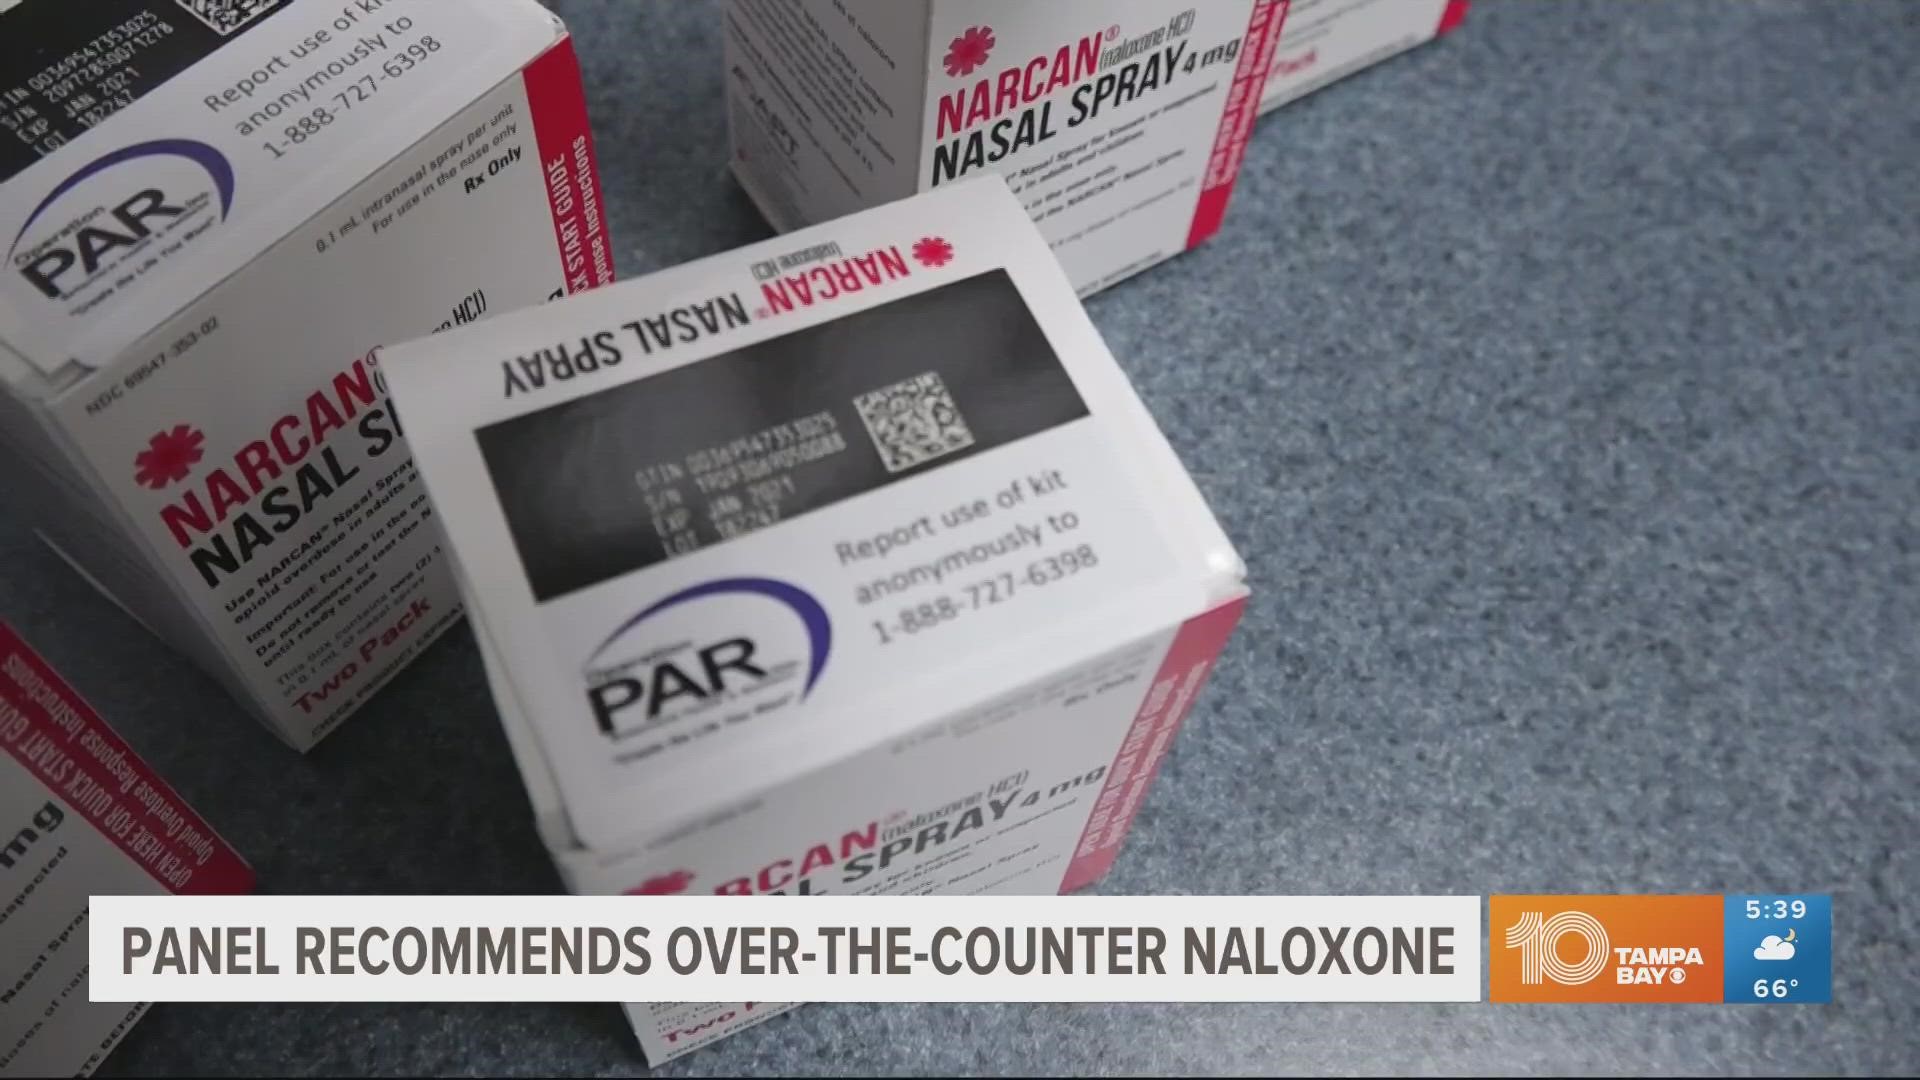 It's the latest government effort to increase use of a medication that has been a key tool in the battle against the U.S. overdose epidemic.